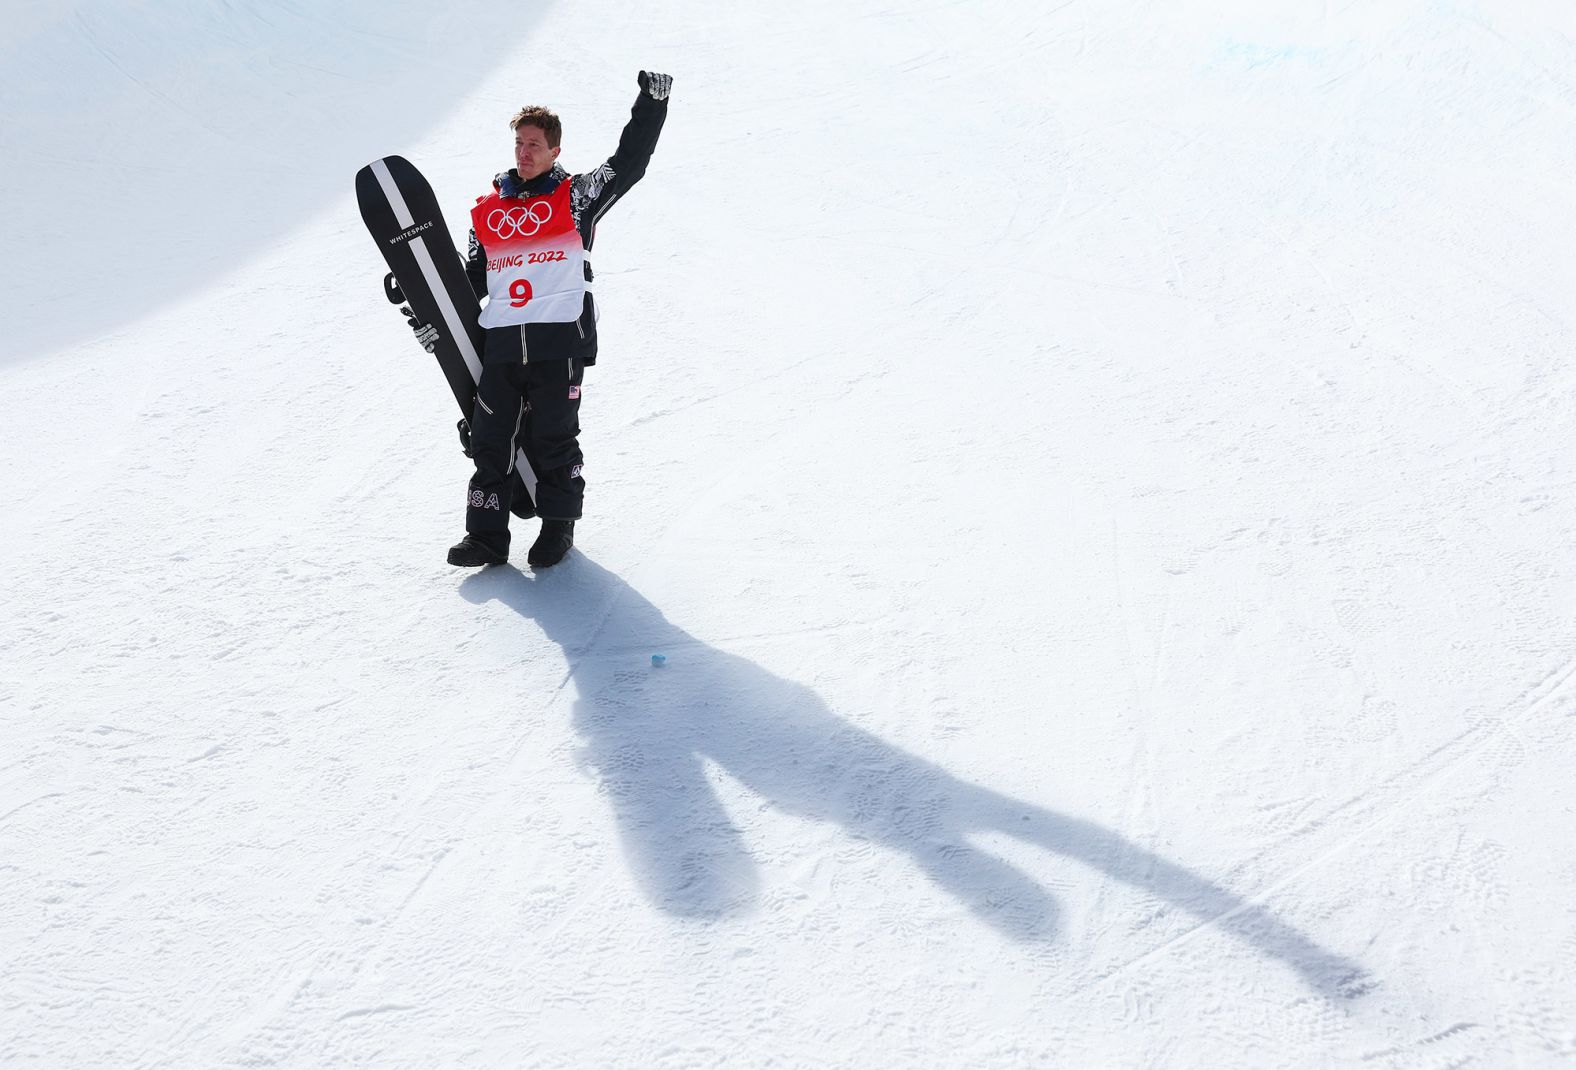 White walks off his last run in the halfpipe final in Beijing. He fell on the run and finished in fourth.